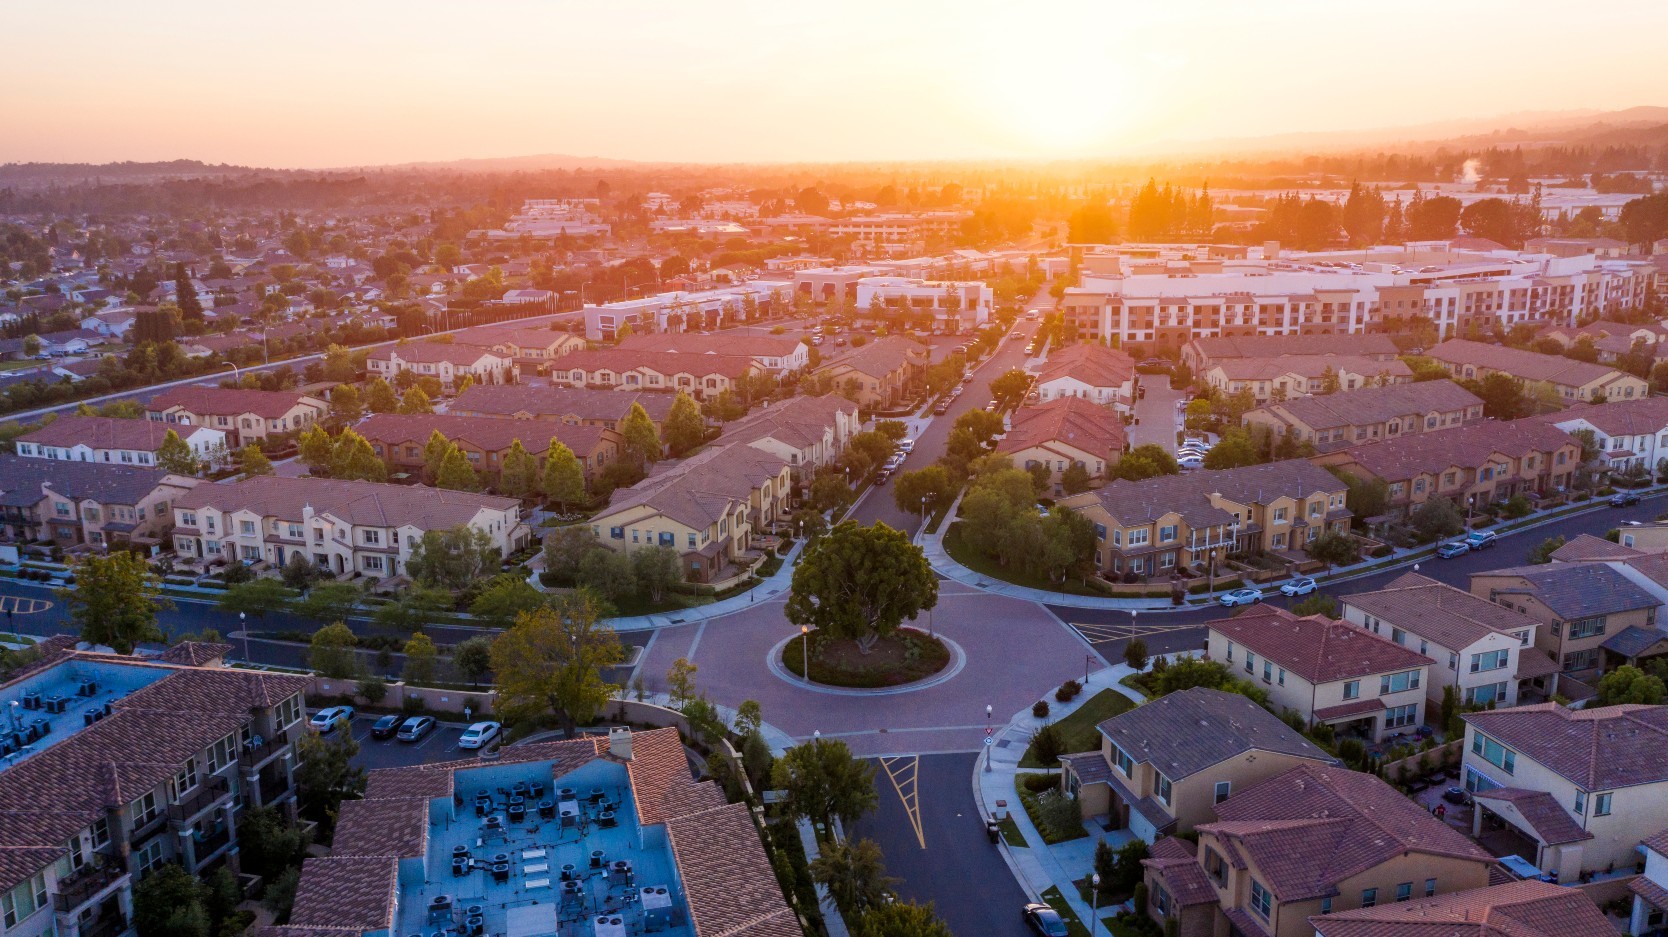 Aerial view of real estate in Brea, California with sunset in the background